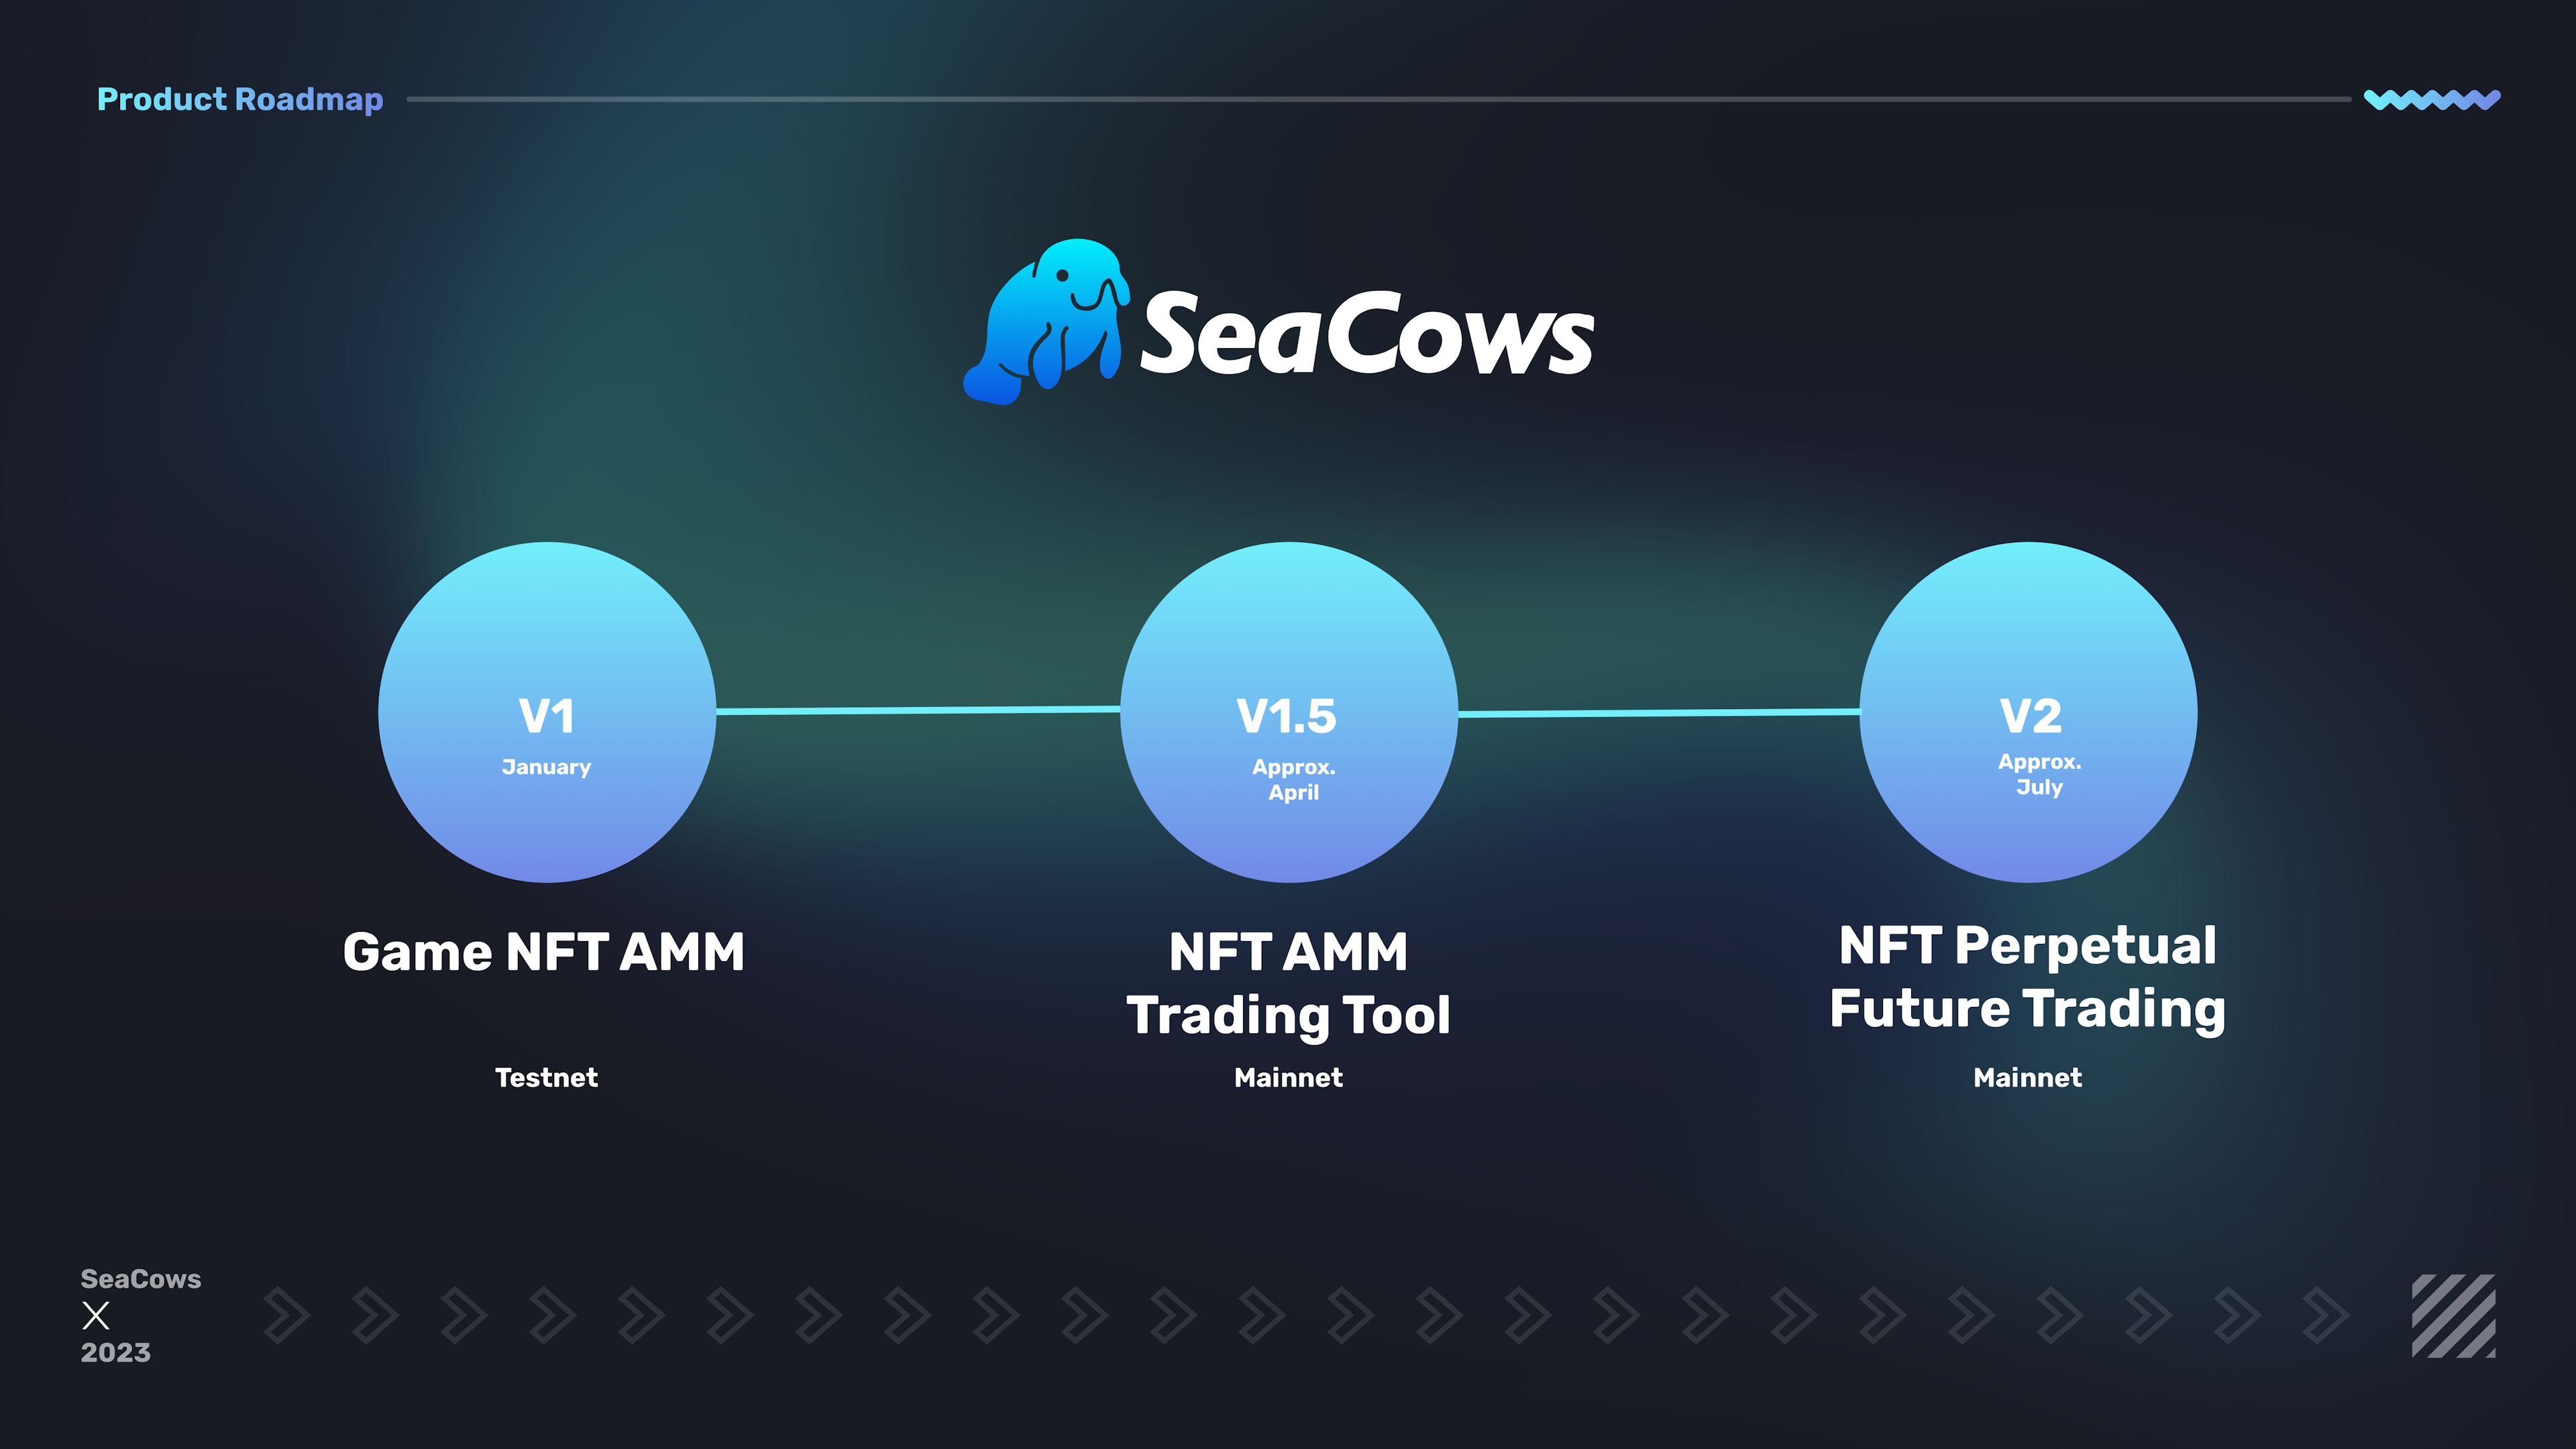 SeaCows General Product Roadmap